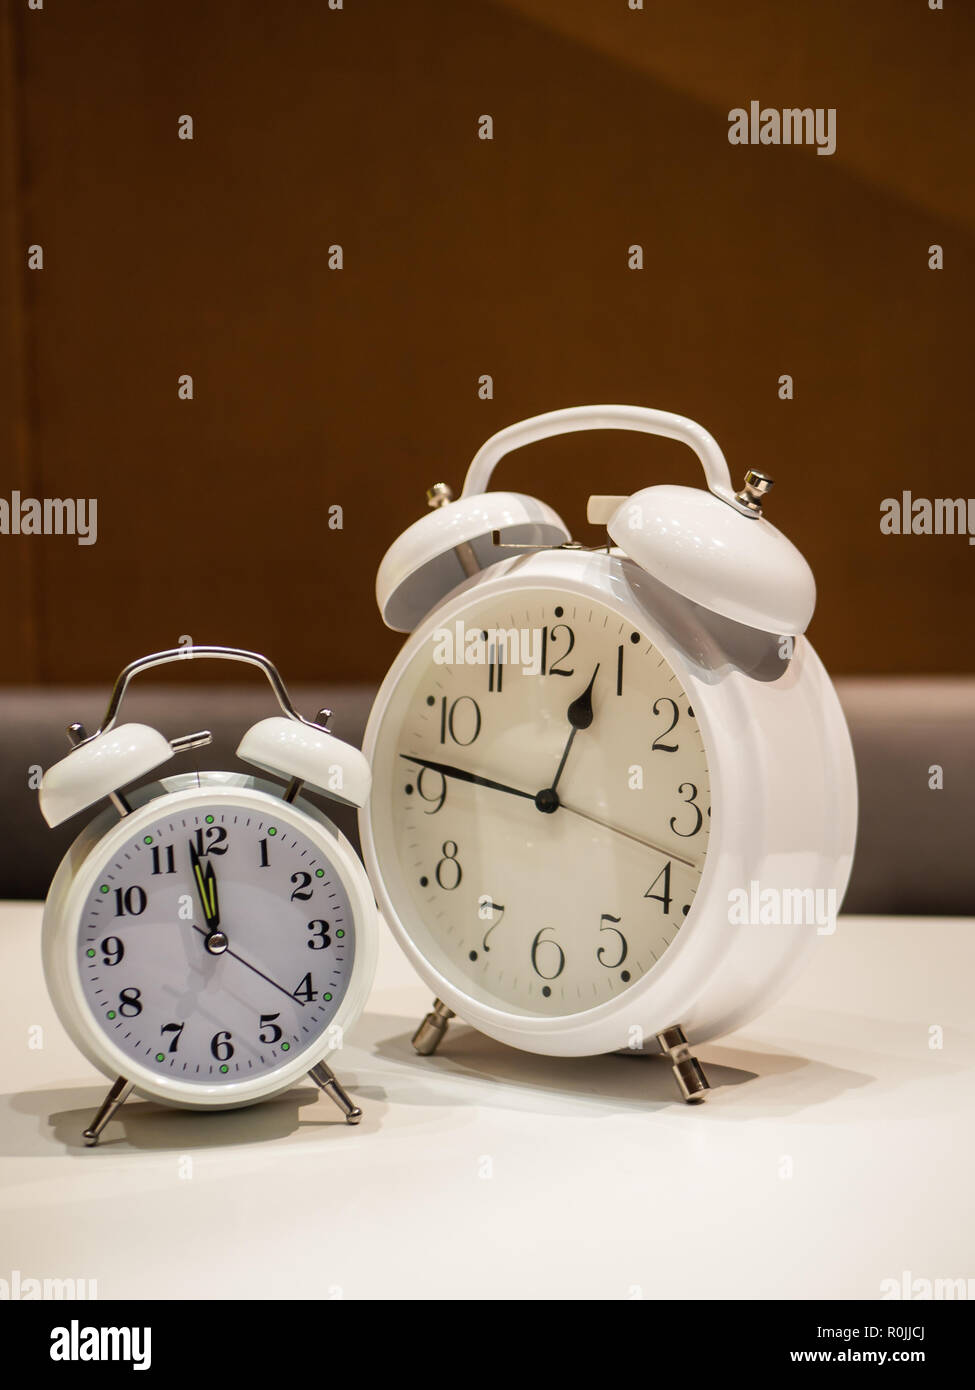 Two Vintage Alarm Clocks standing on a white desk with brown blurry sofa in background Stock Photo